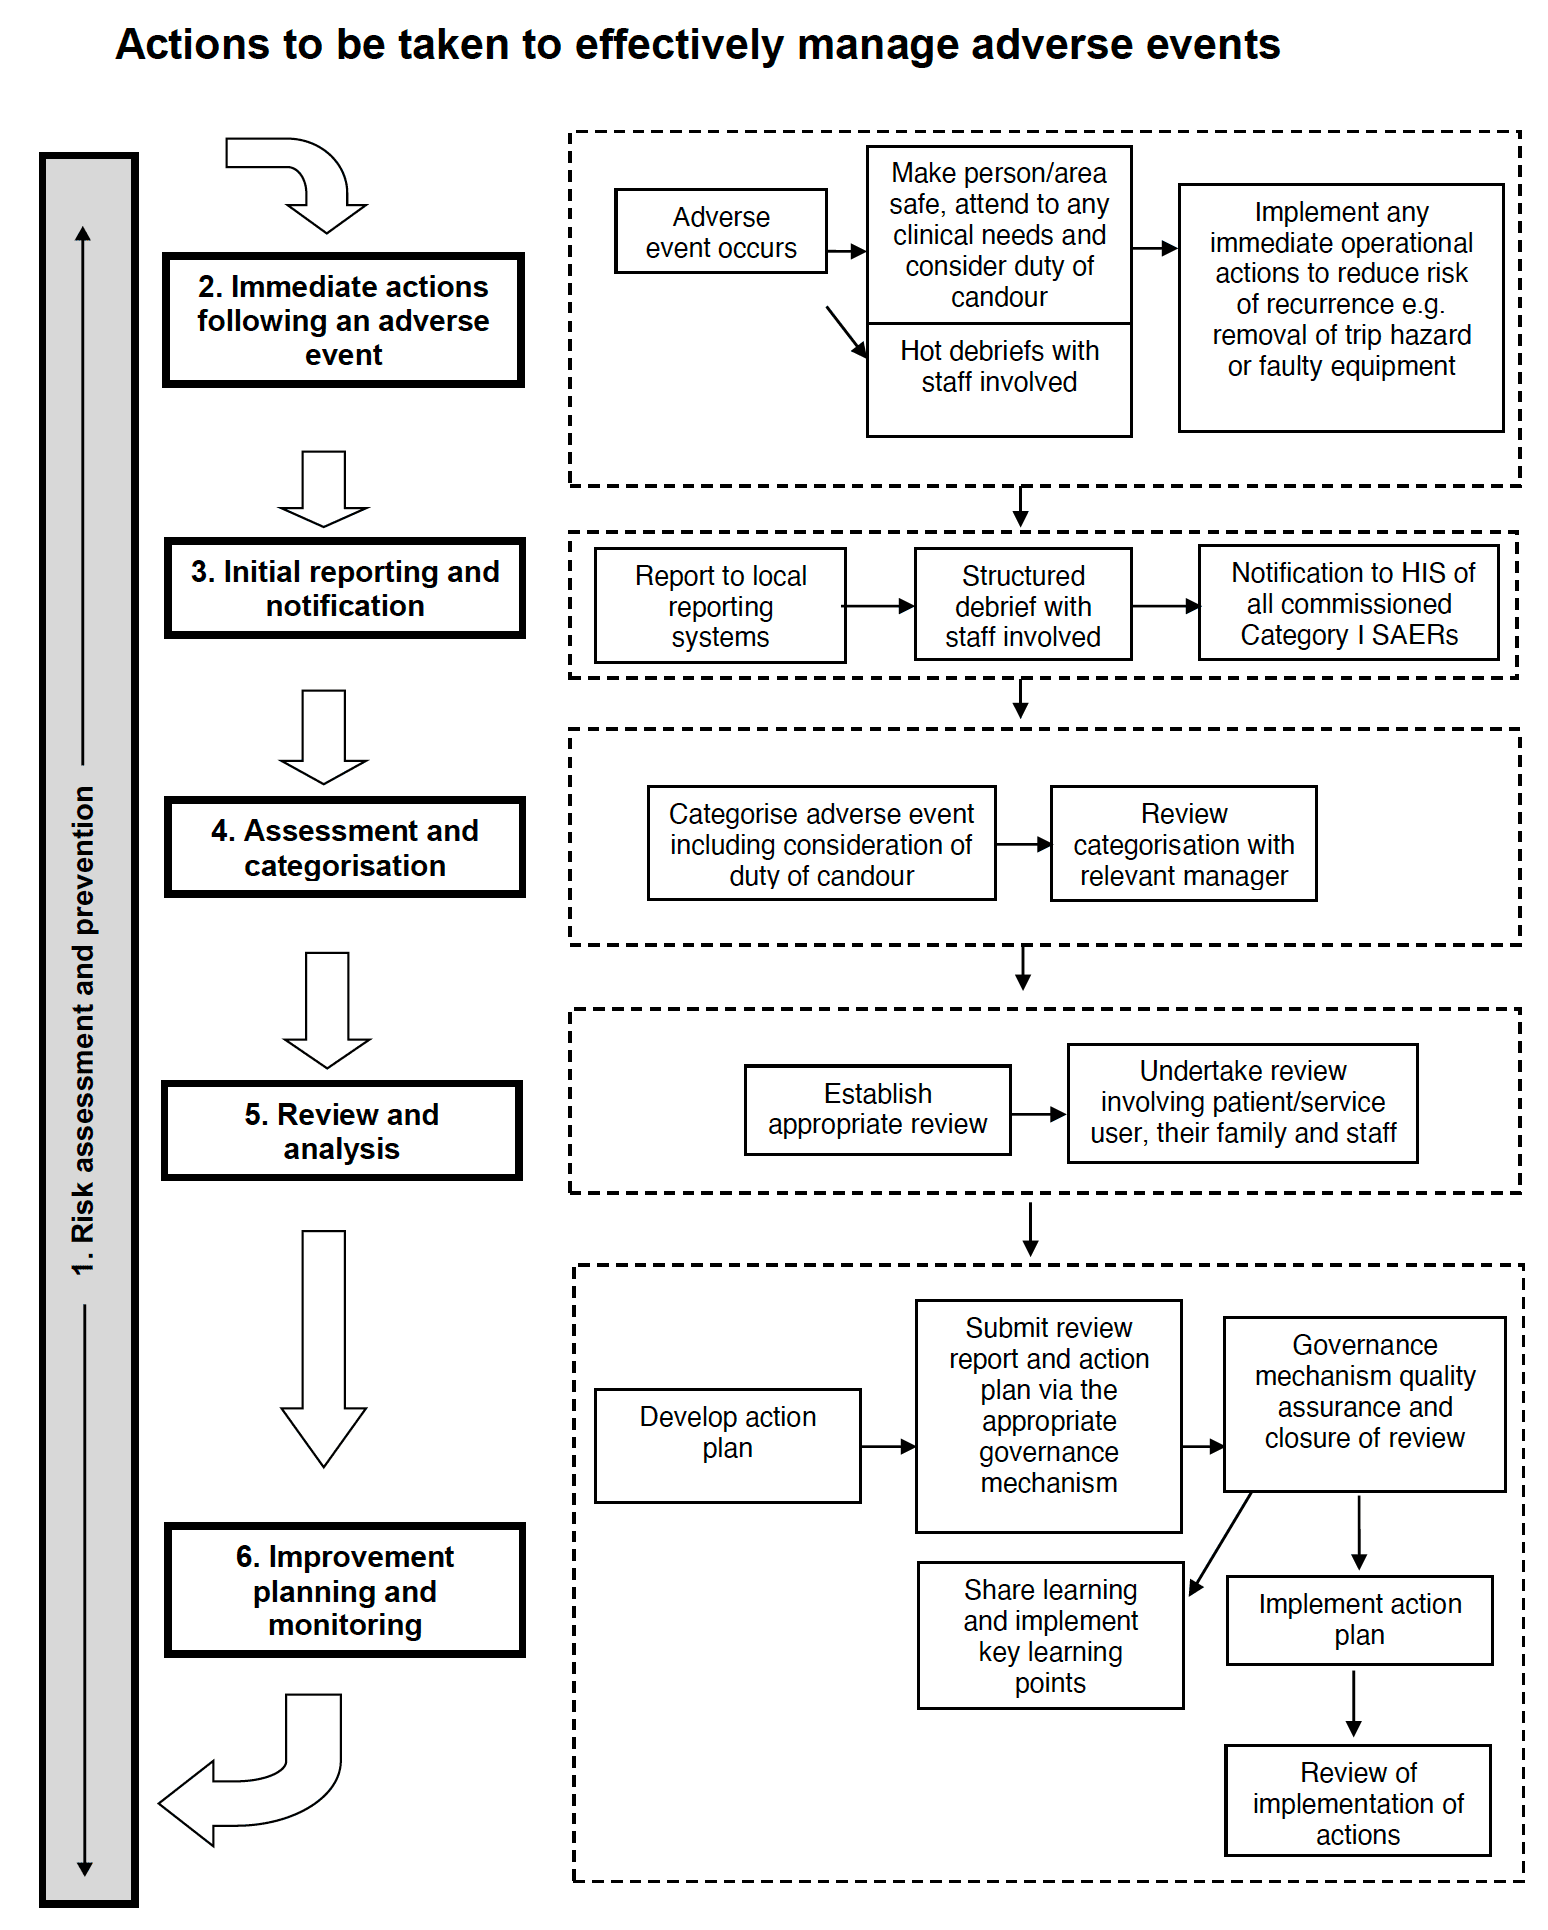 This flow chart shows the six individual stages of how to manage an adverse event effectively.  Stage one risk assessment and prevention will also be returned to following stage six, improvement planning and monitoring, as the process is cyclical in nature.  Each stage in the flowchart has a box of suggested examples of steps that could be taken at each stage of the process. 